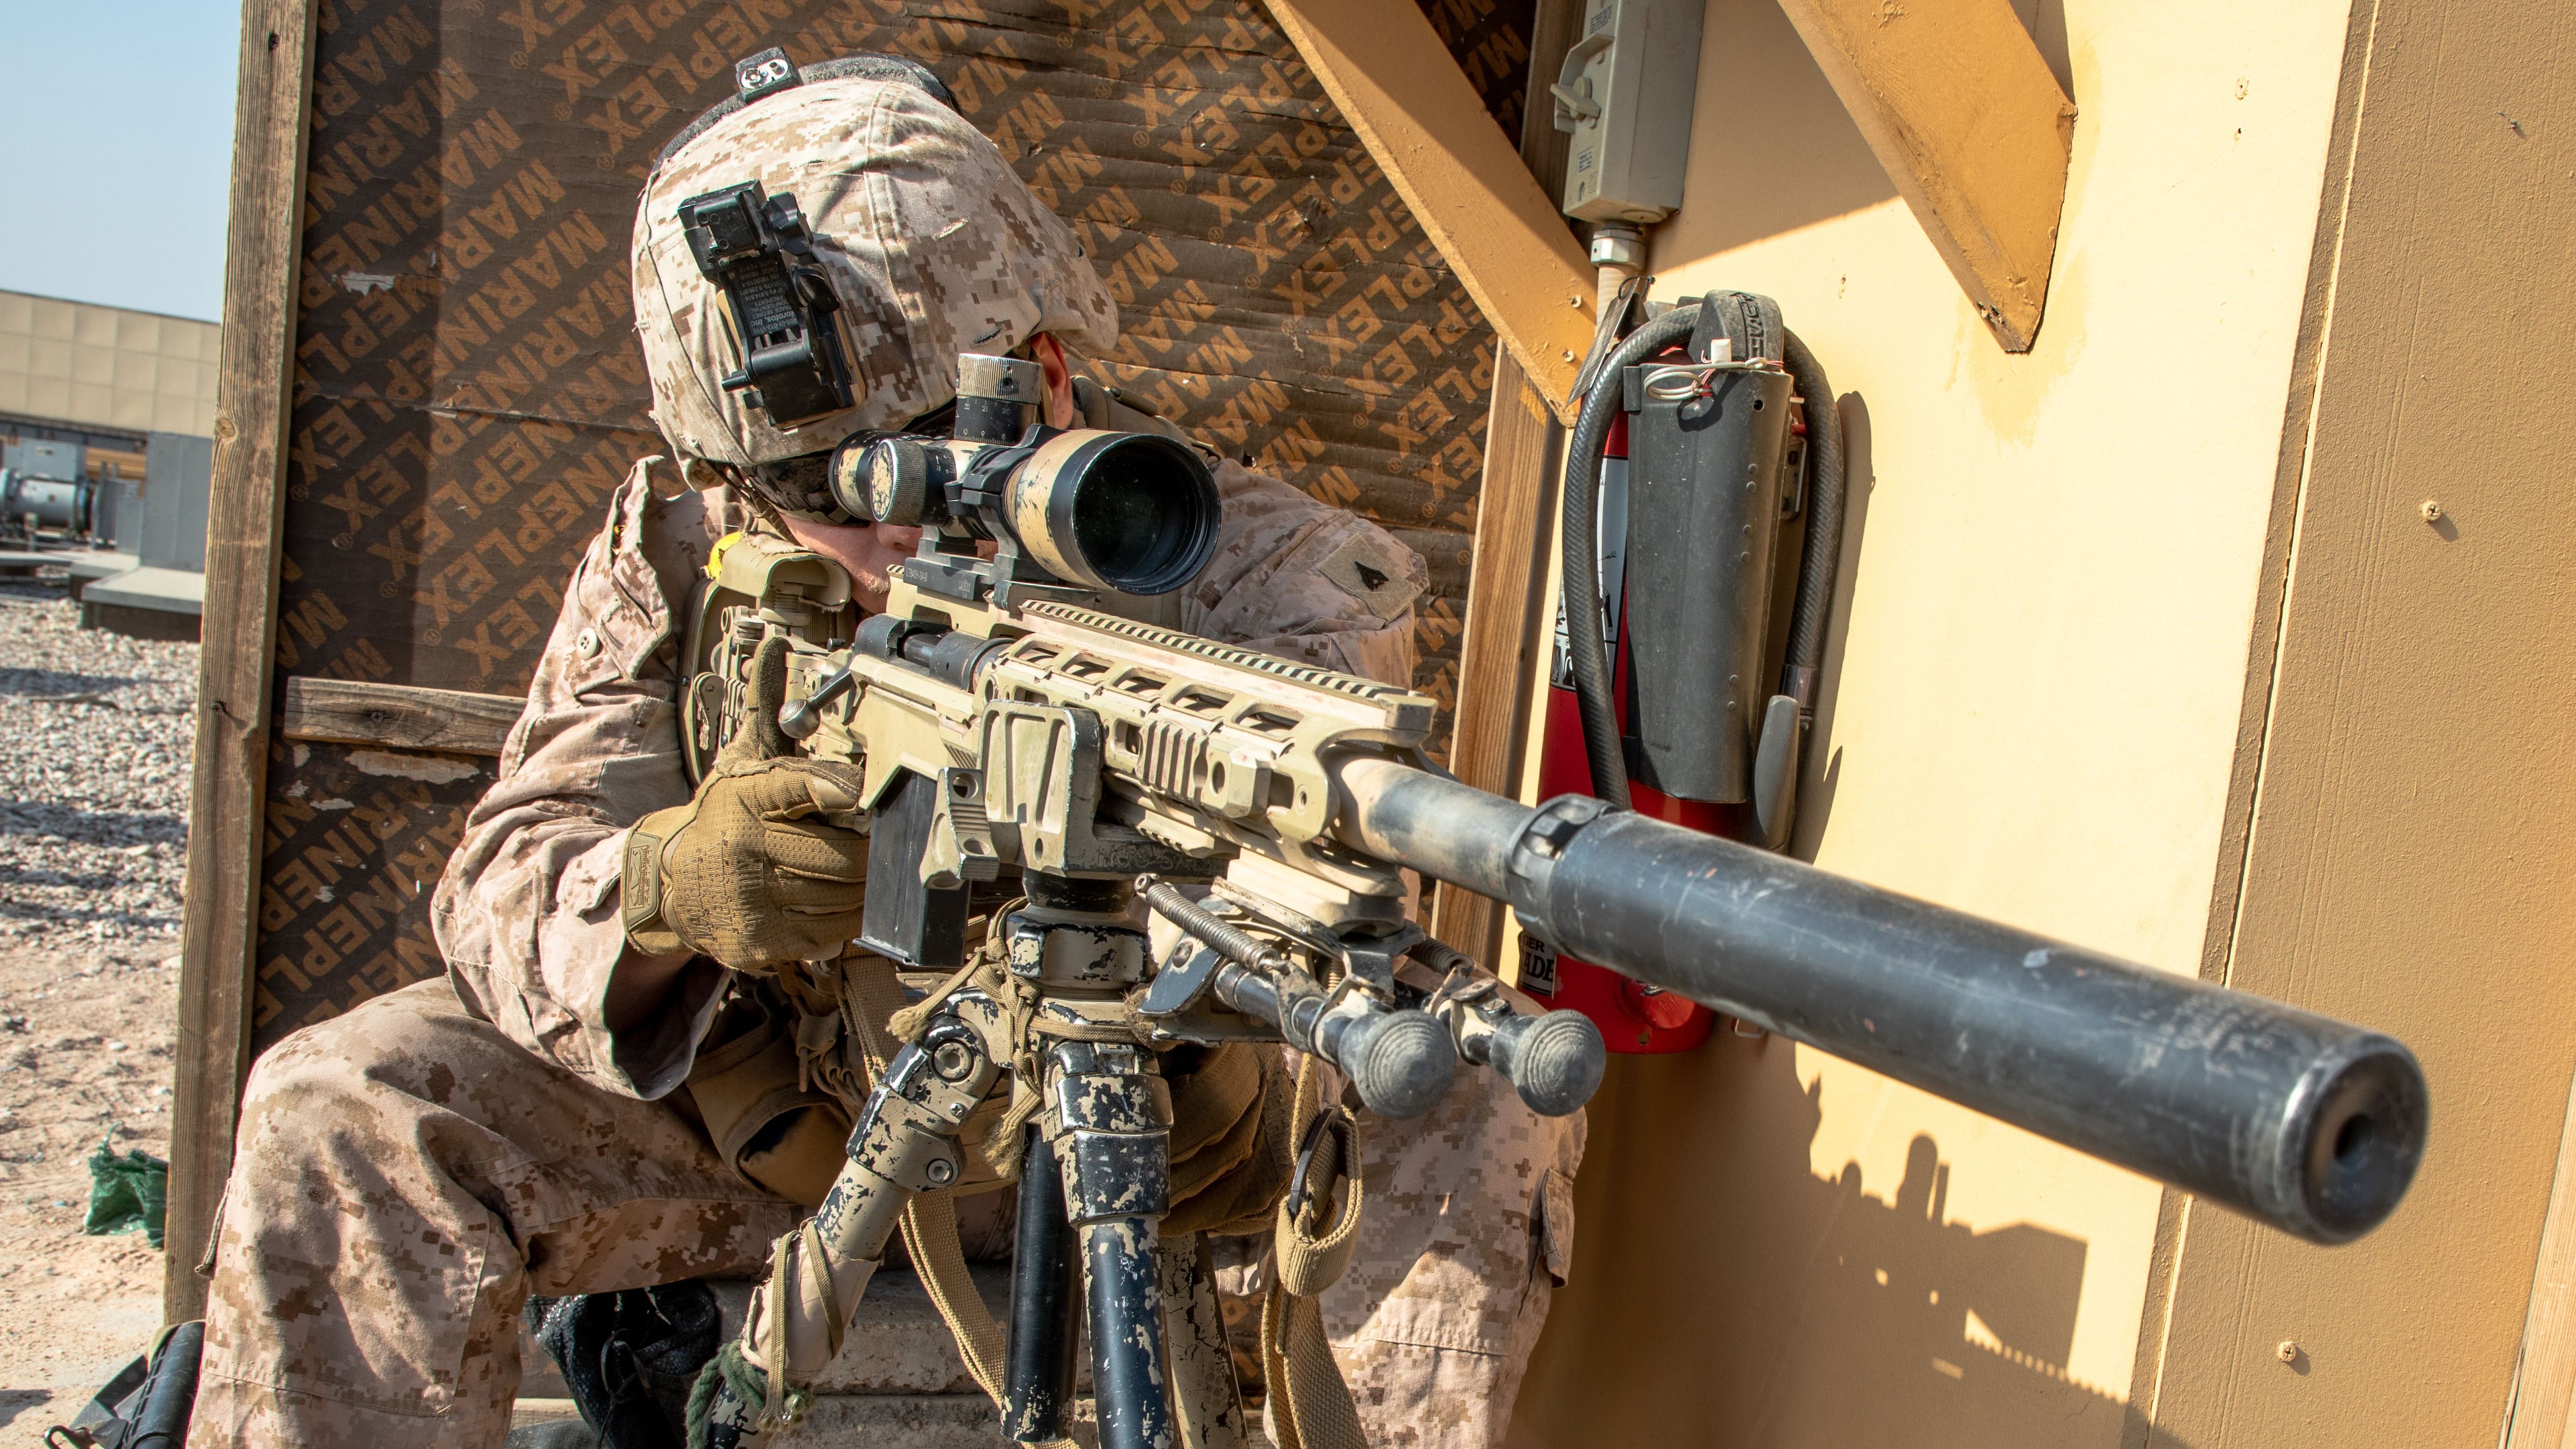 Marines to field multibarrel sniper rifle to replace two existing weapons